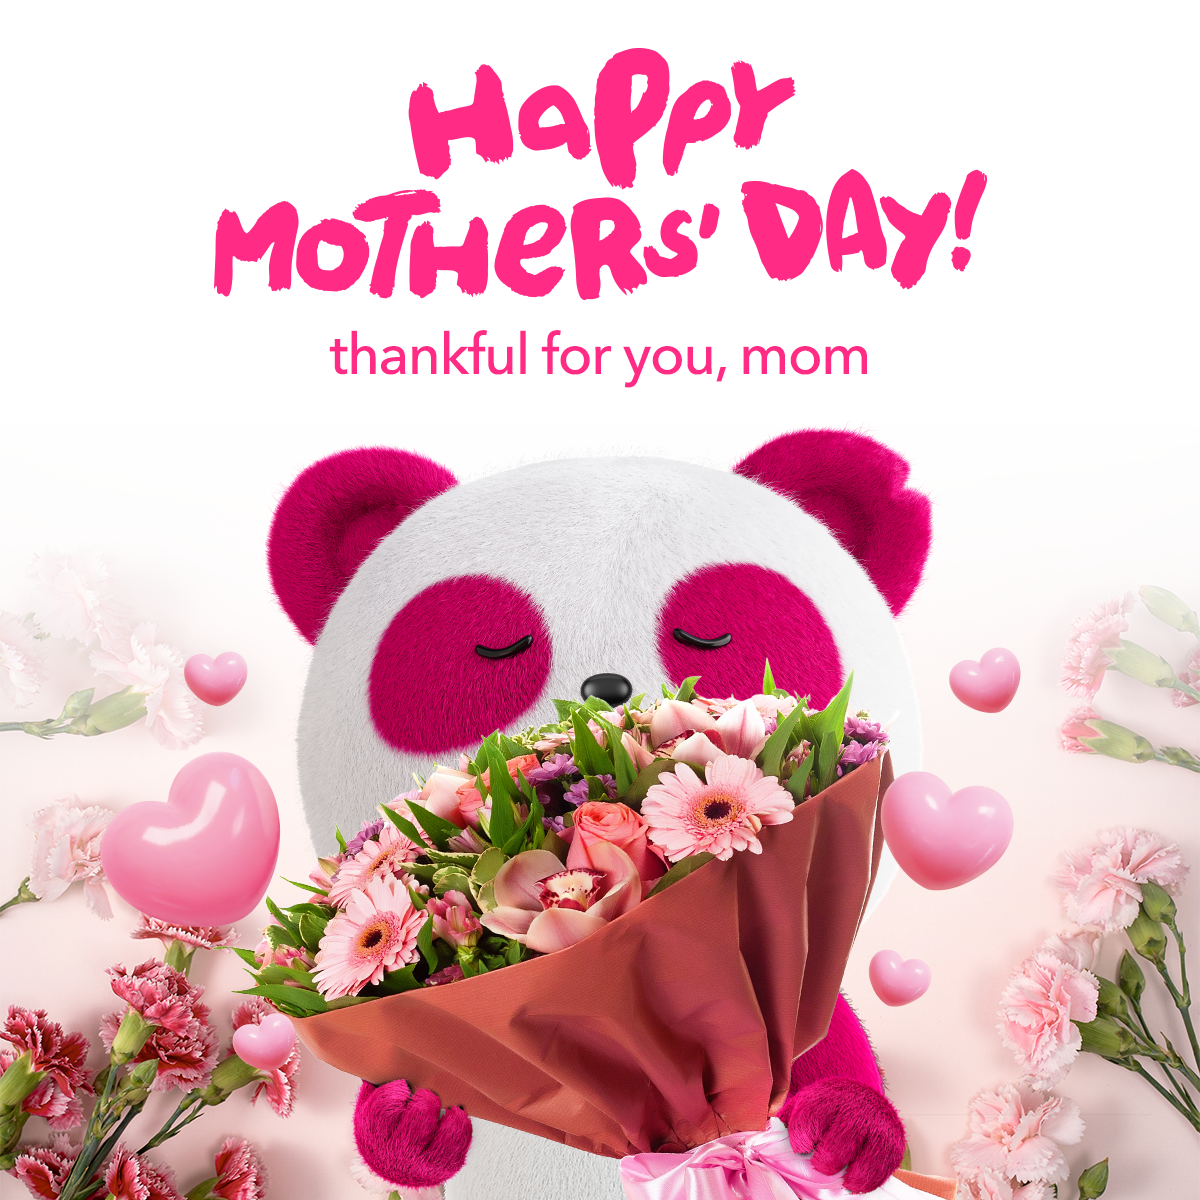 love-like-a-panda-sharing-happiness-this-mothers-day-with-foodpanda